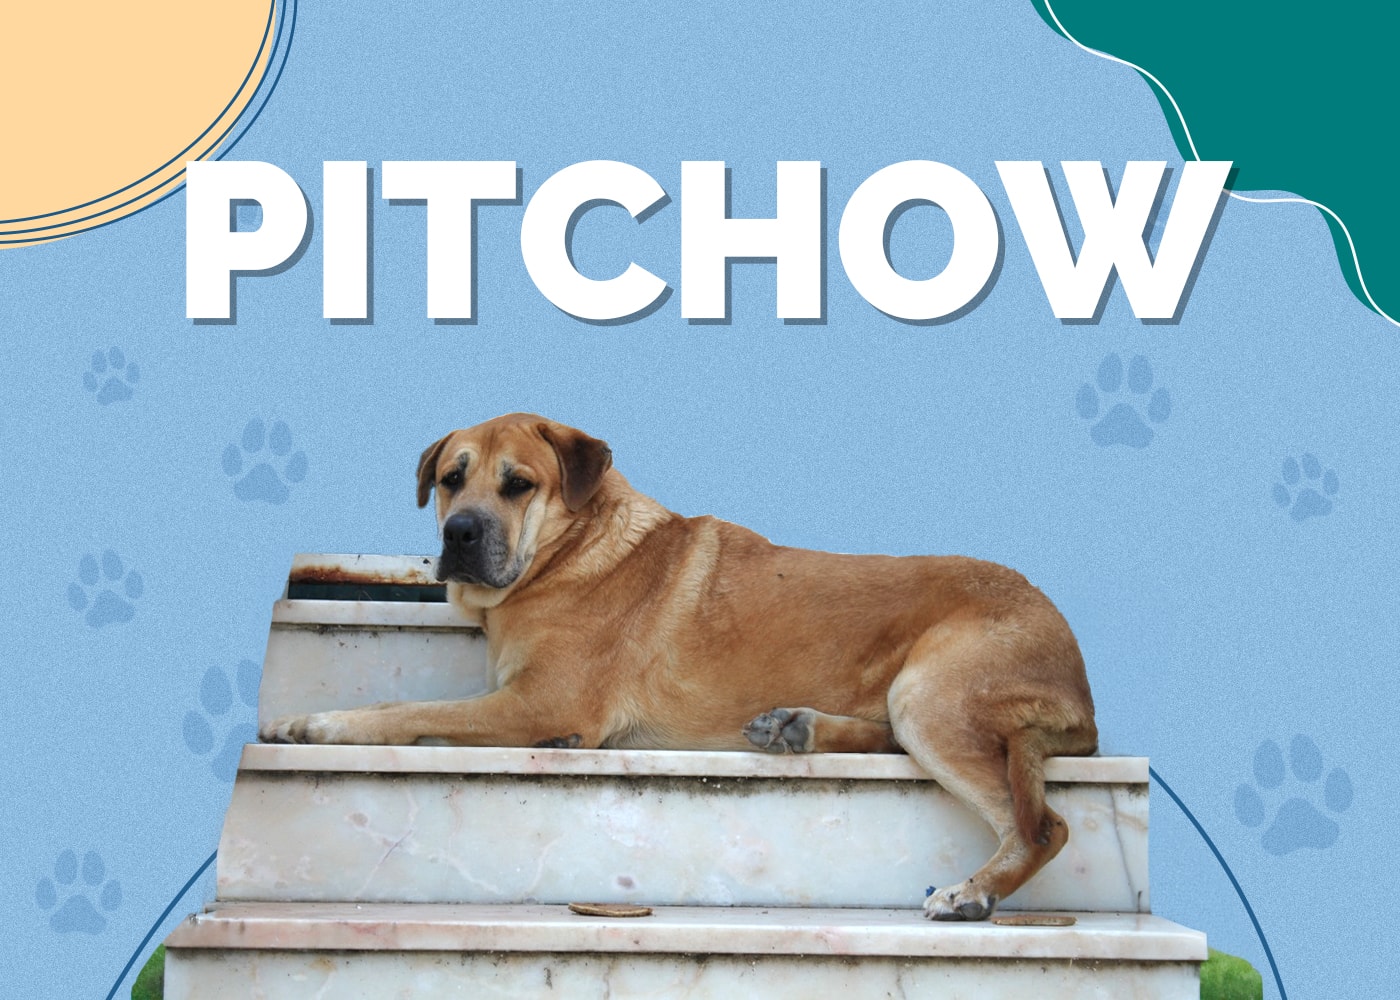 Pitchow (American Pitbull Terrier & Chow Chow Mix)